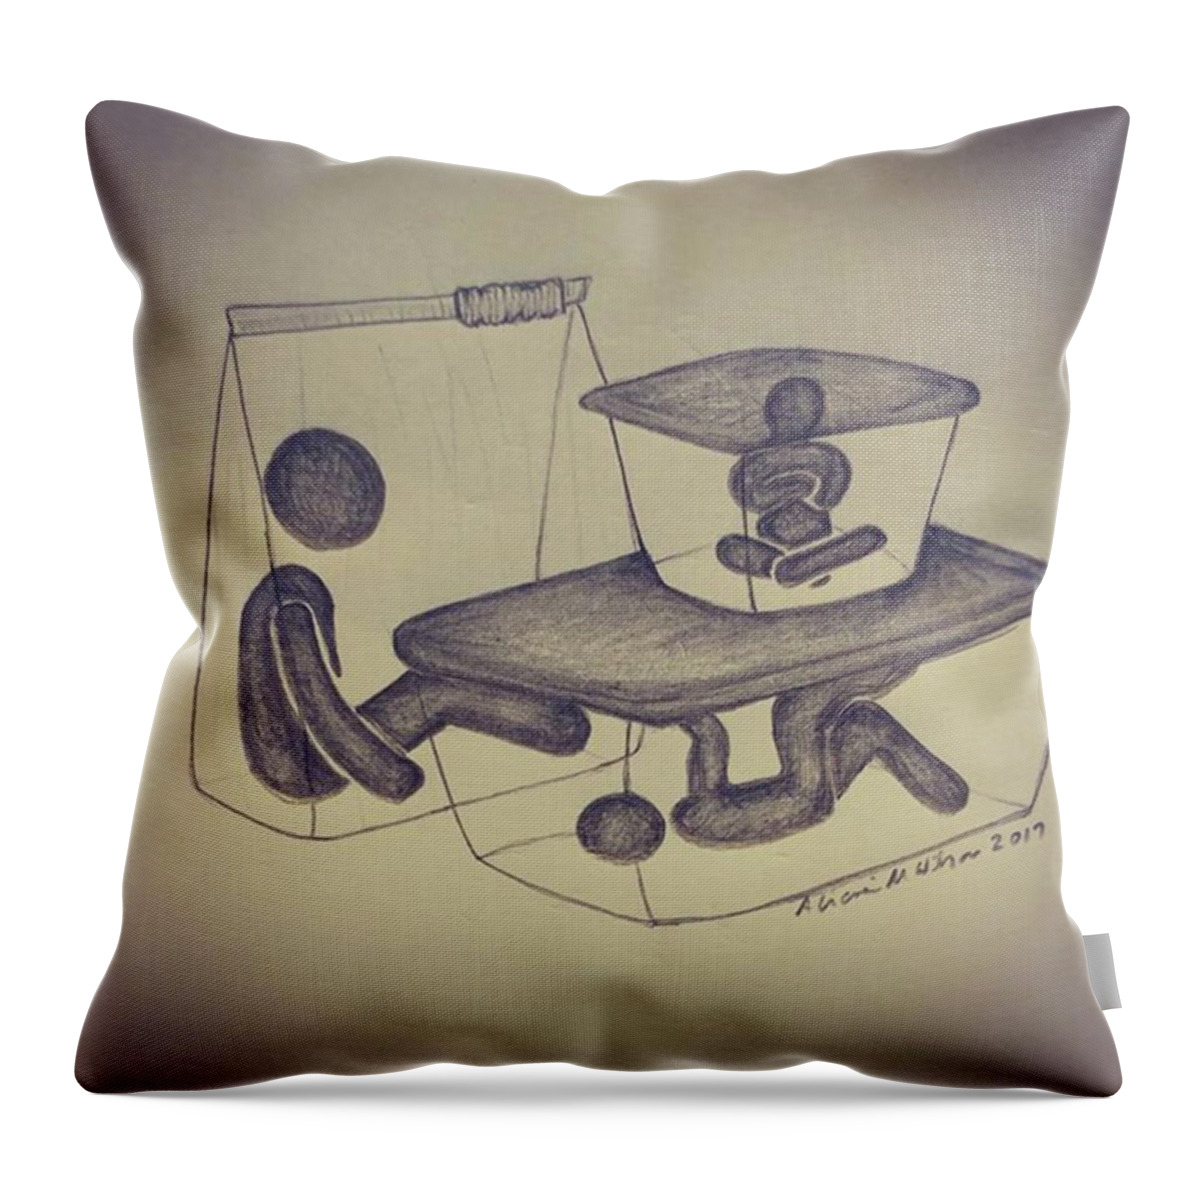 Sketch Throw Pillow featuring the photograph #sketch #doodle #draw #art #13 by Lee Lee Luv